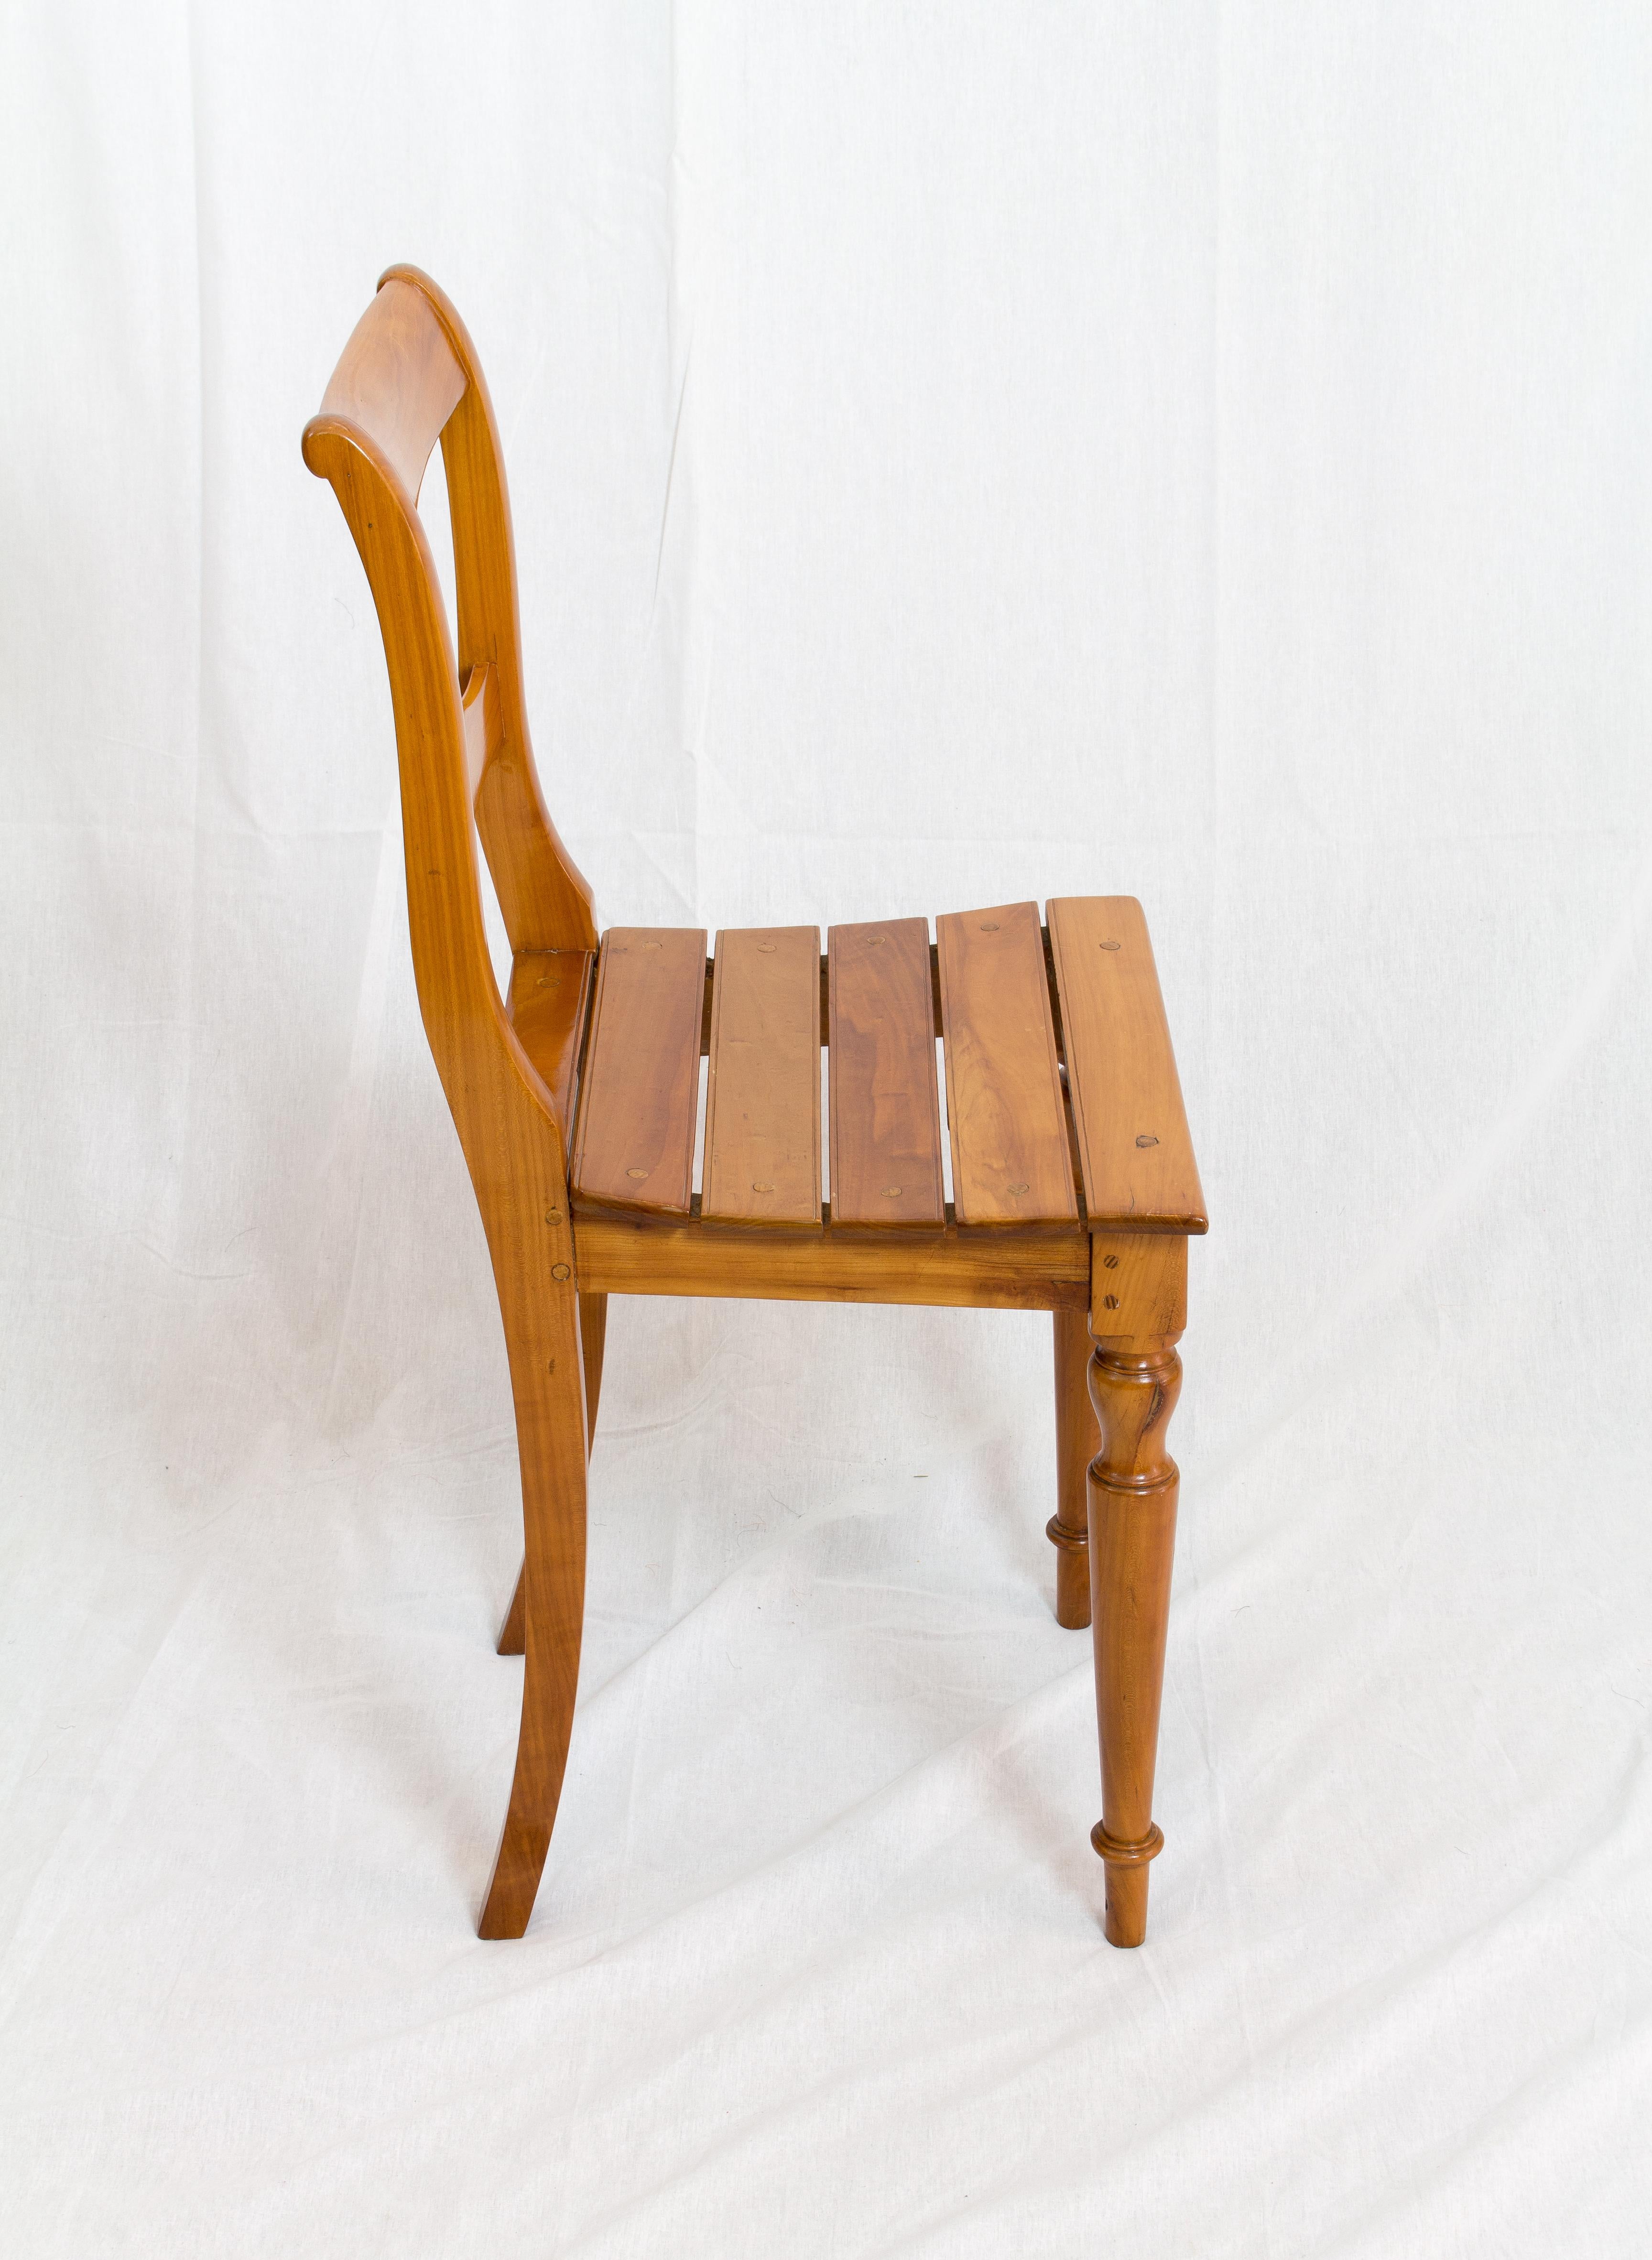 A chair from the time of the Biedermeier circa 1830. The chair is made of solid cherrywood.
In very good restored condition.